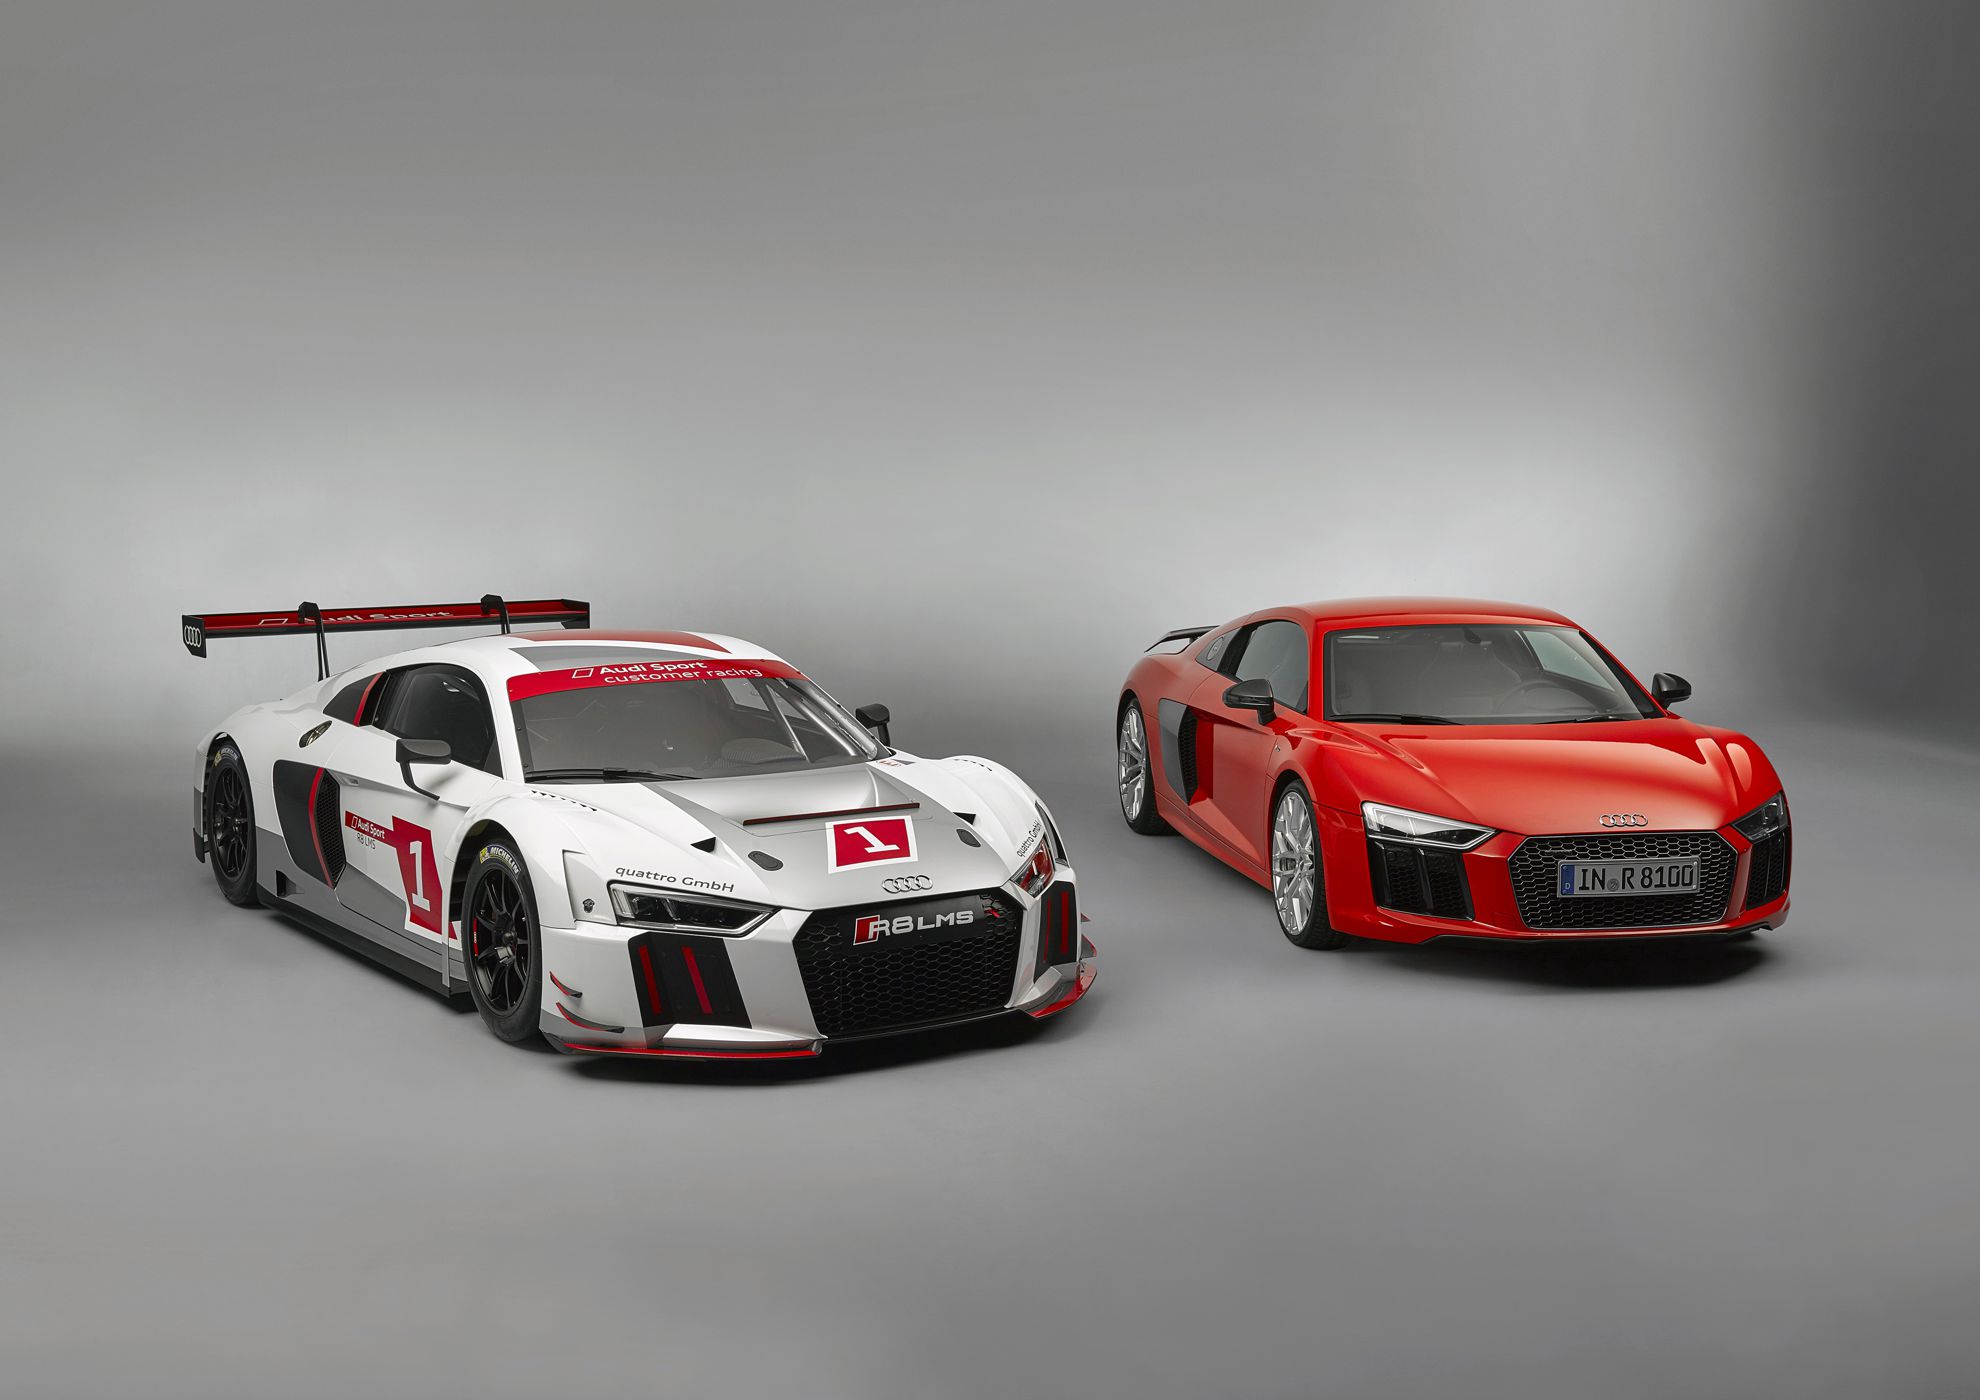 You can now buy the new Audi R8 LMS